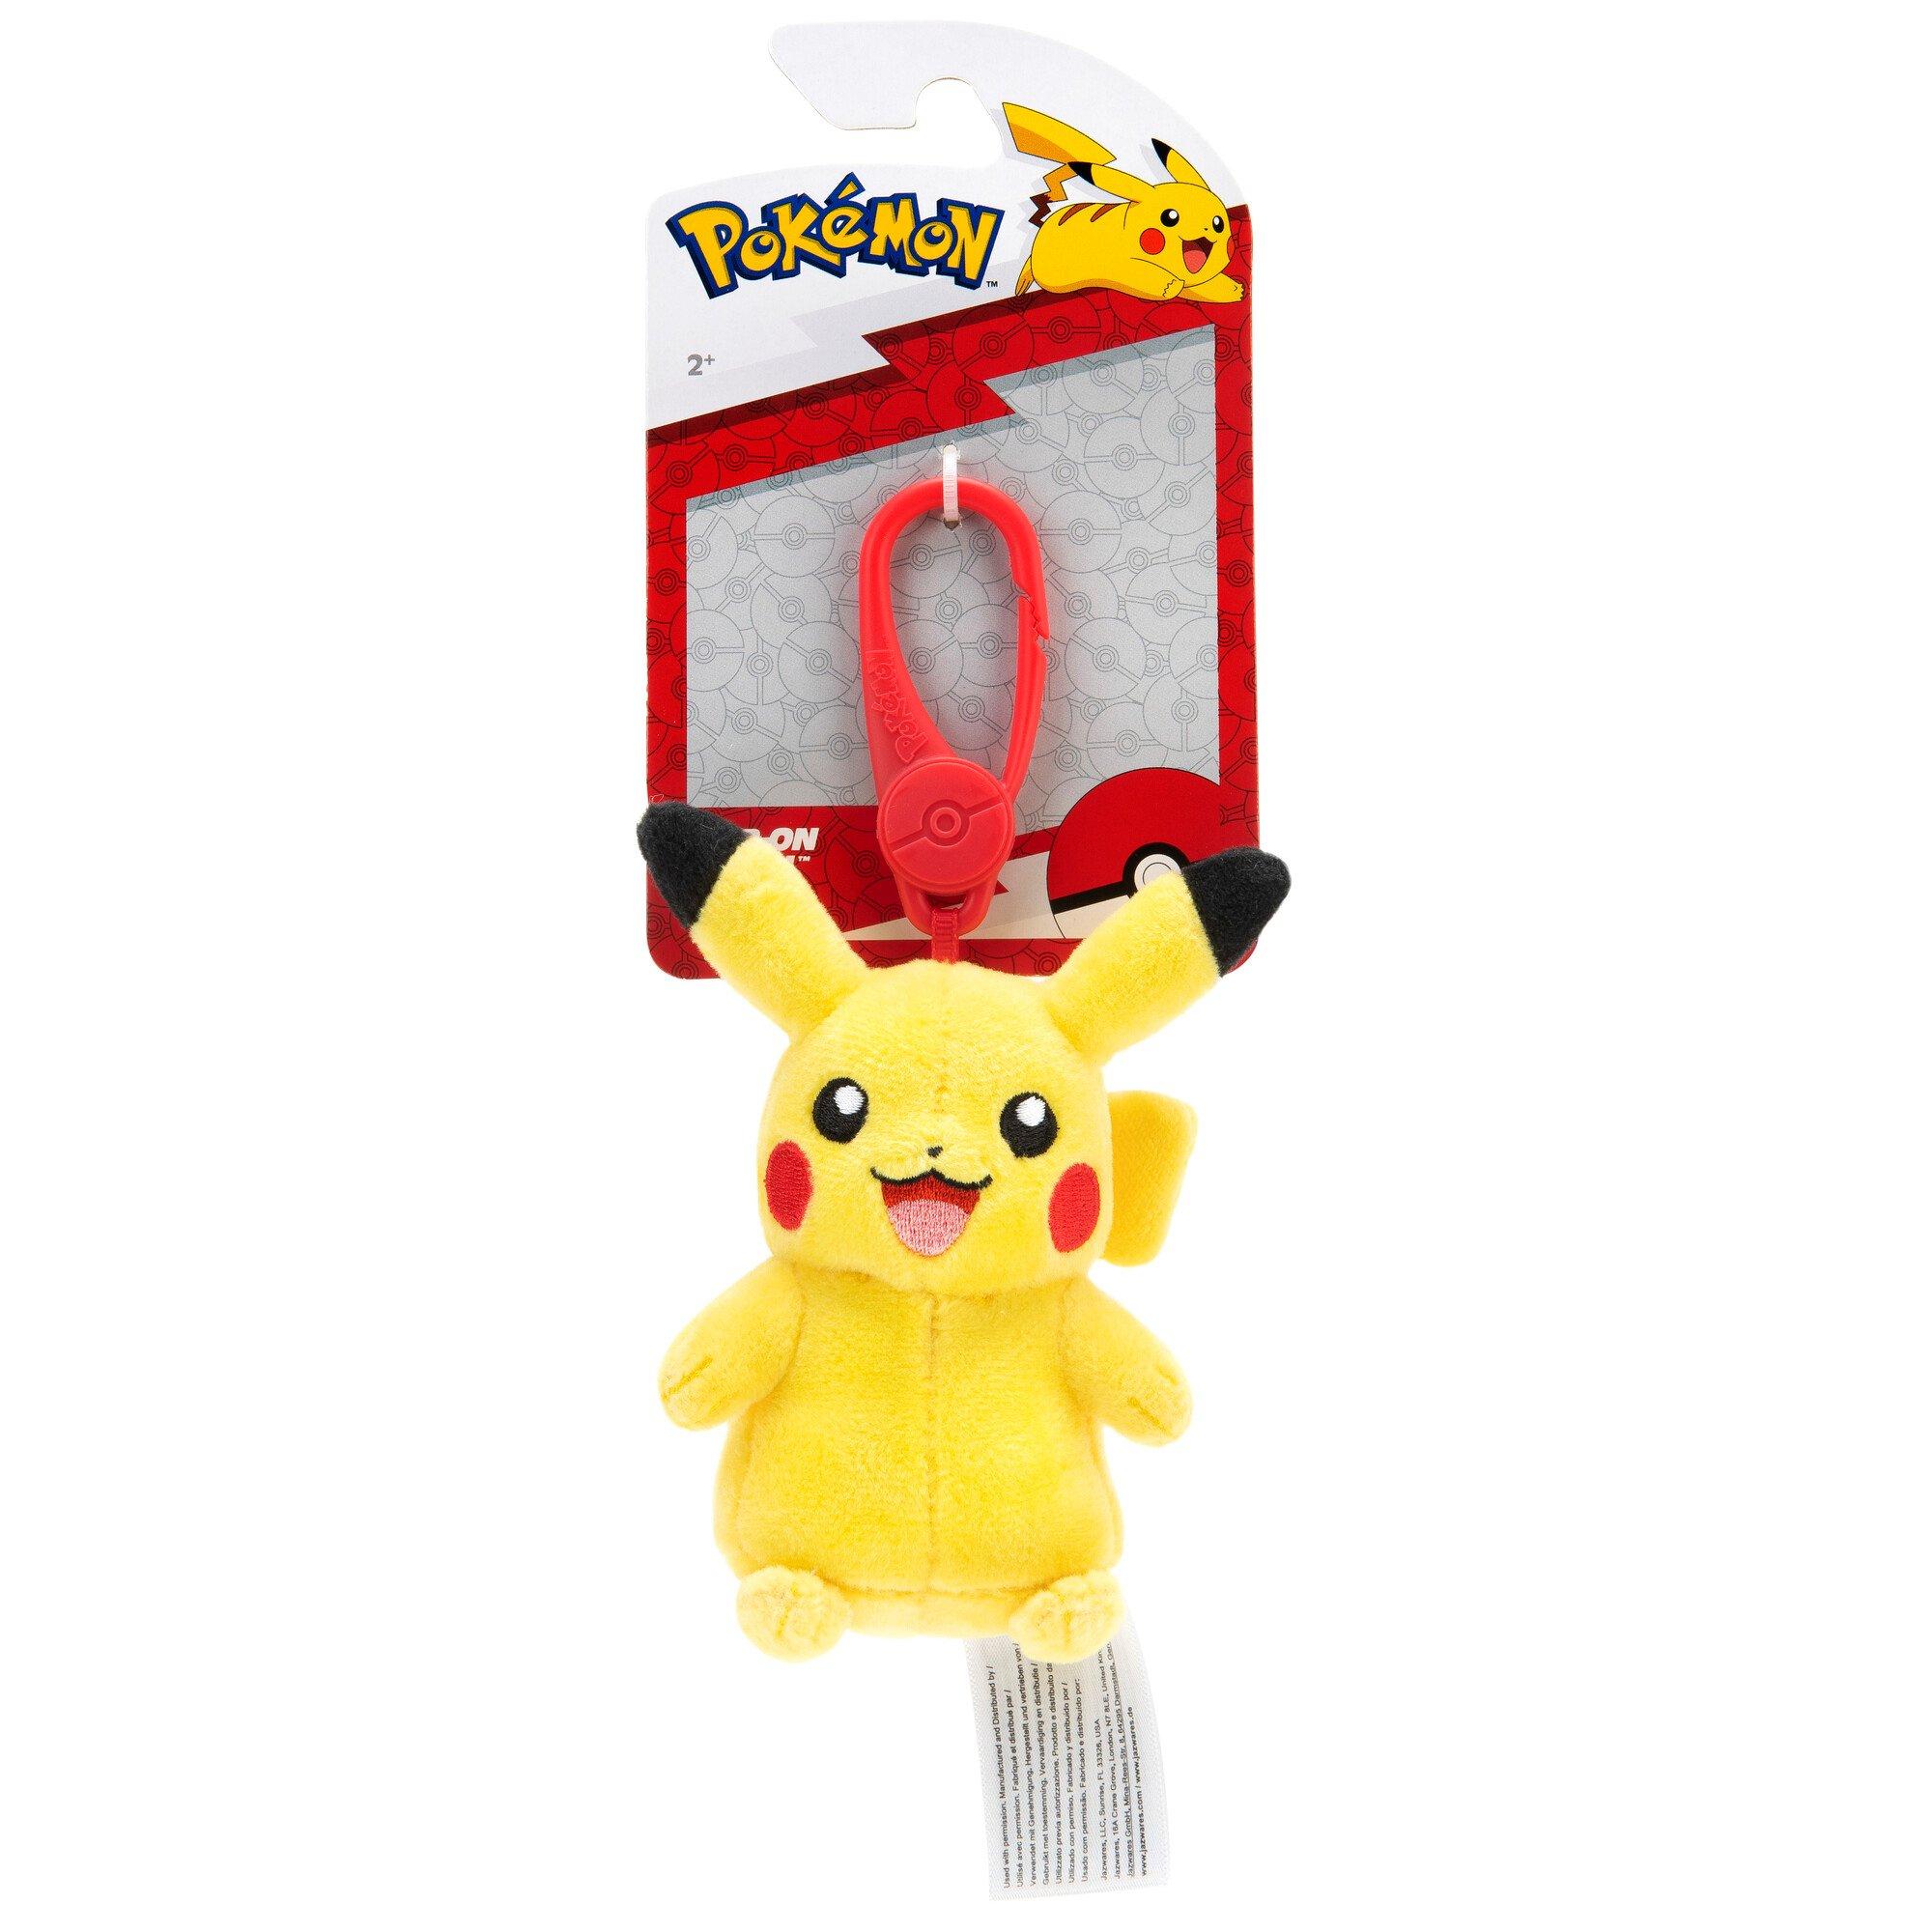 Pokemon Official Pikachu Clip and Go, Comes with Pikachu Action